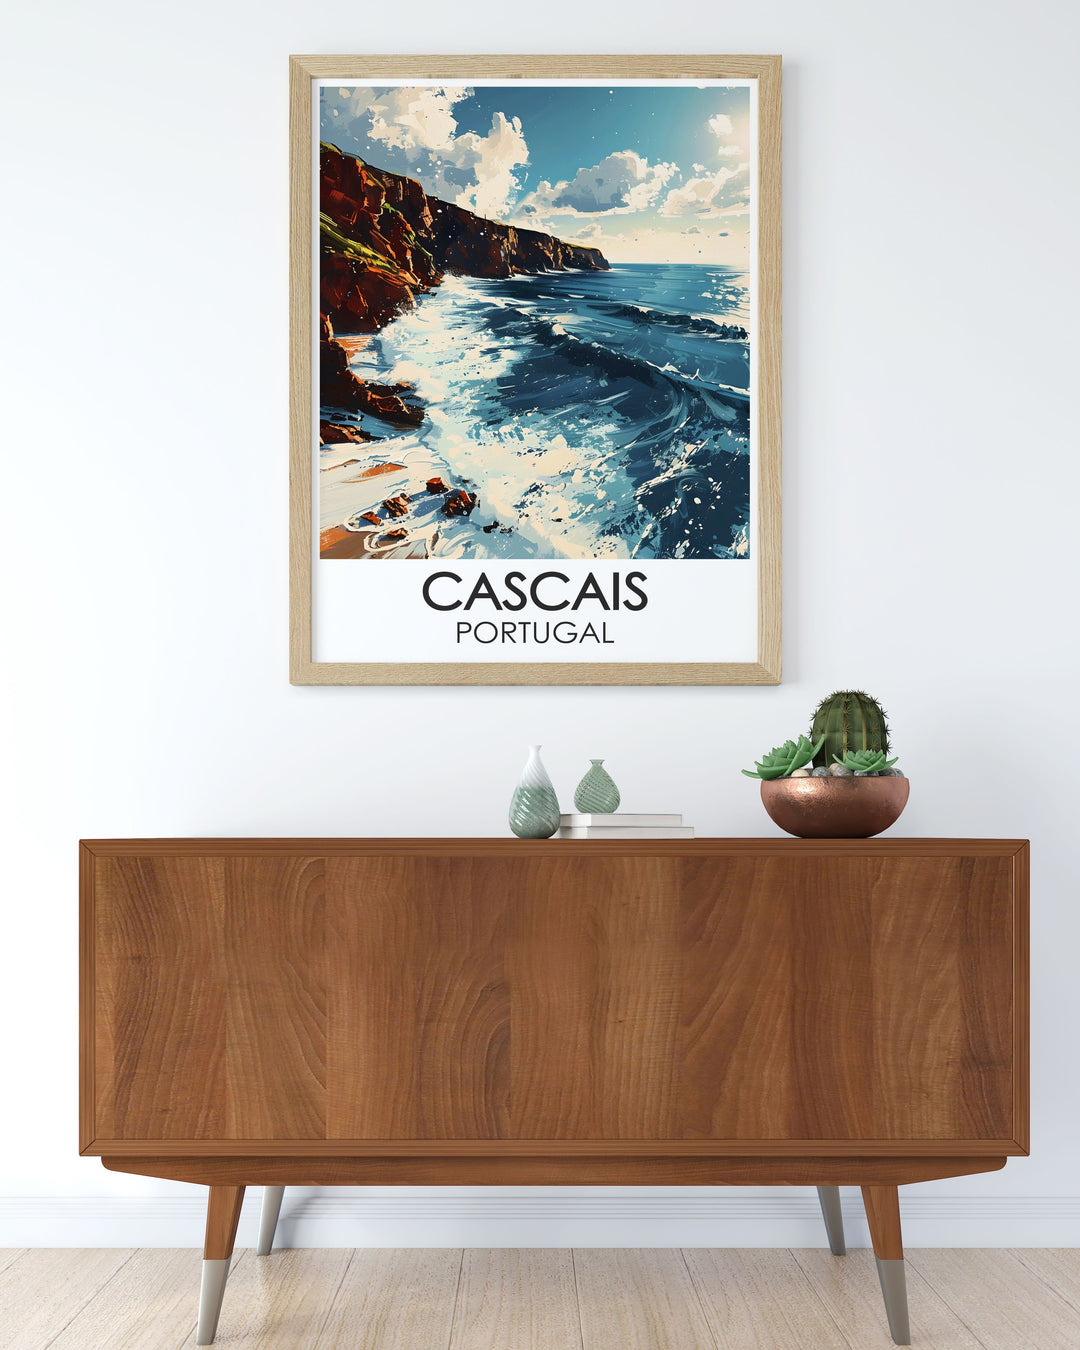 The breathtaking coastline of Cascais, captured in vibrant detail, emphasizing the beauty of its beaches and the dramatic cliffs of Boca do Inferno.